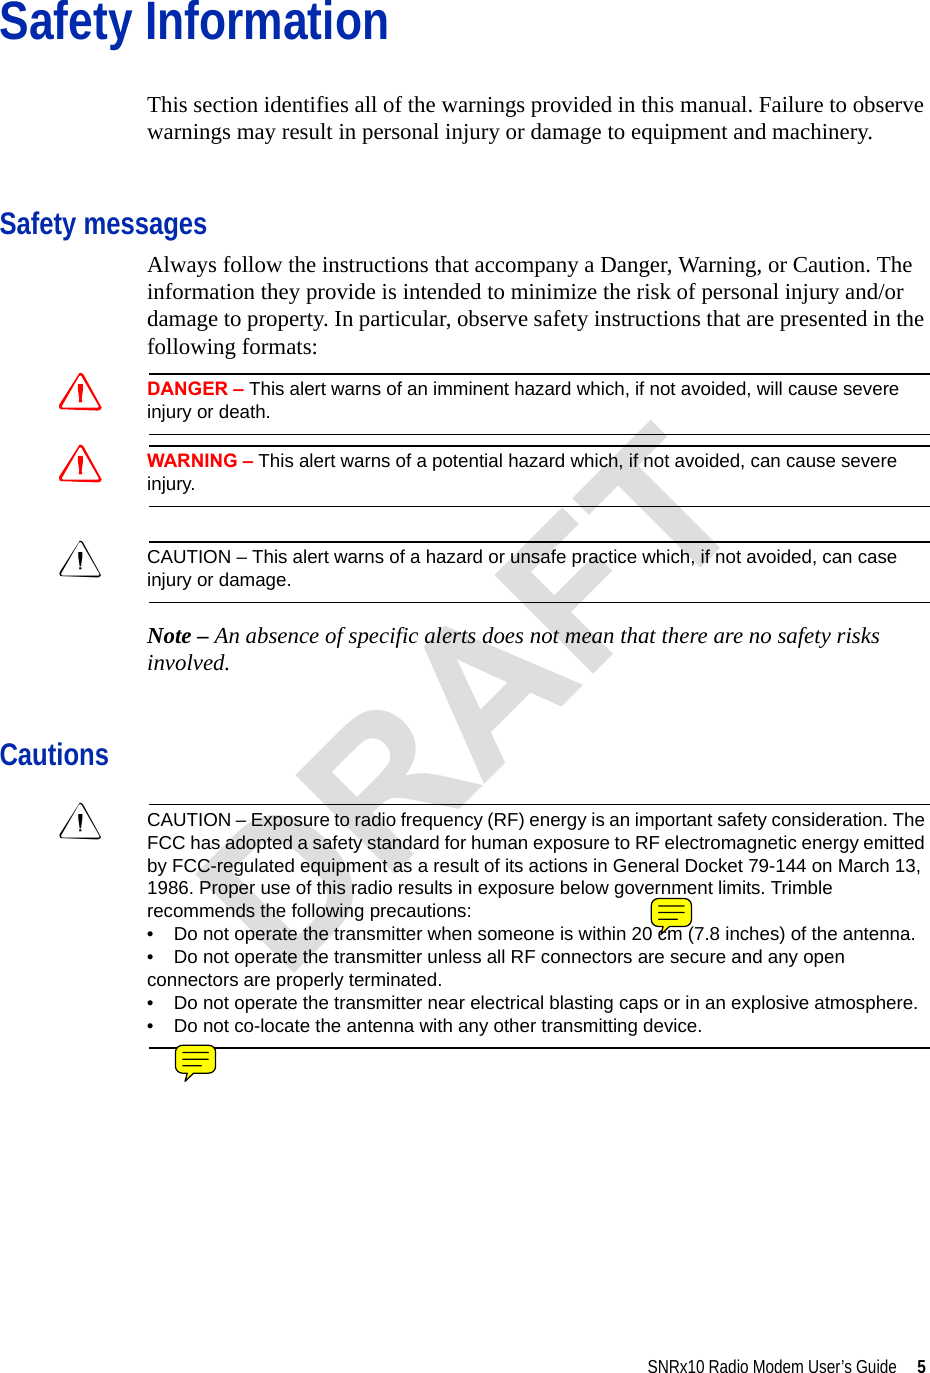 SNRx10 Radio Modem User’s Guide     5Safety InformationThis section identifies all of the warnings provided in this manual. Failure to observe warnings may result in personal injury or damage to equipment and machinery.Safety messagesAlways follow the instructions that accompany a Danger, Warning, or Caution. The information they provide is intended to minimize the risk of personal injury and/or damage to property. In particular, observe safety instructions that are presented in the following formats:CDANGER – This alert warns of an imminent hazard which, if not avoided, will cause severe injury or death.CWARNING – This alert warns of a potential hazard which, if not avoided, can cause severe injury.CCAUTION – This alert warns of a hazard or unsafe practice which, if not avoided, can case injury or damage.Note – An absence of specific alerts does not mean that there are no safety risks involved.CautionsCCAUTION – Exposure to radio frequency (RF) energy is an important safety consideration. The FCC has adopted a safety standard for human exposure to RF electromagnetic energy emitted by FCC-regulated equipment as a result of its actions in General Docket 79-144 on March 13, 1986. Proper use of this radio results in exposure below government limits. Trimble recommends the following precautions:•    Do not operate the transmitter when someone is within 20 cm (7.8 inches) of the antenna.•    Do not operate the transmitter unless all RF connectors are secure and any open connectors are properly terminated.•    Do not operate the transmitter near electrical blasting caps or in an explosive atmosphere.•    Do not co-locate the antenna with any other transmitting device.DRAFT